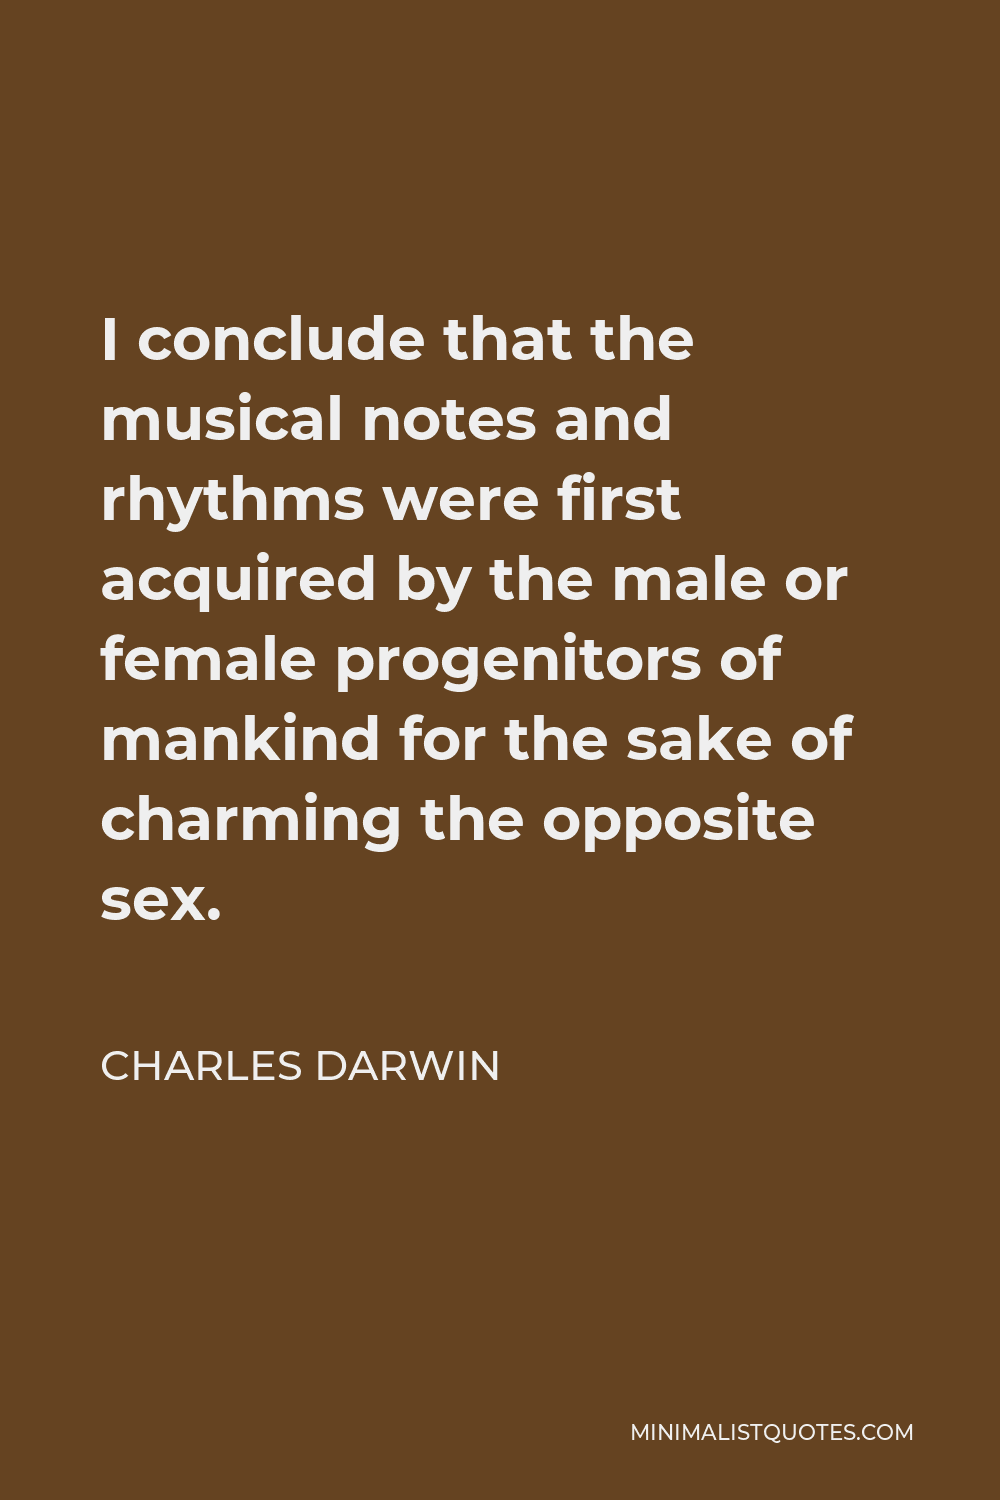 Charles Darwin Quote - I conclude that the musical notes and rhythms were first acquired by the male or female progenitors of mankind for the sake of charming the opposite sex.